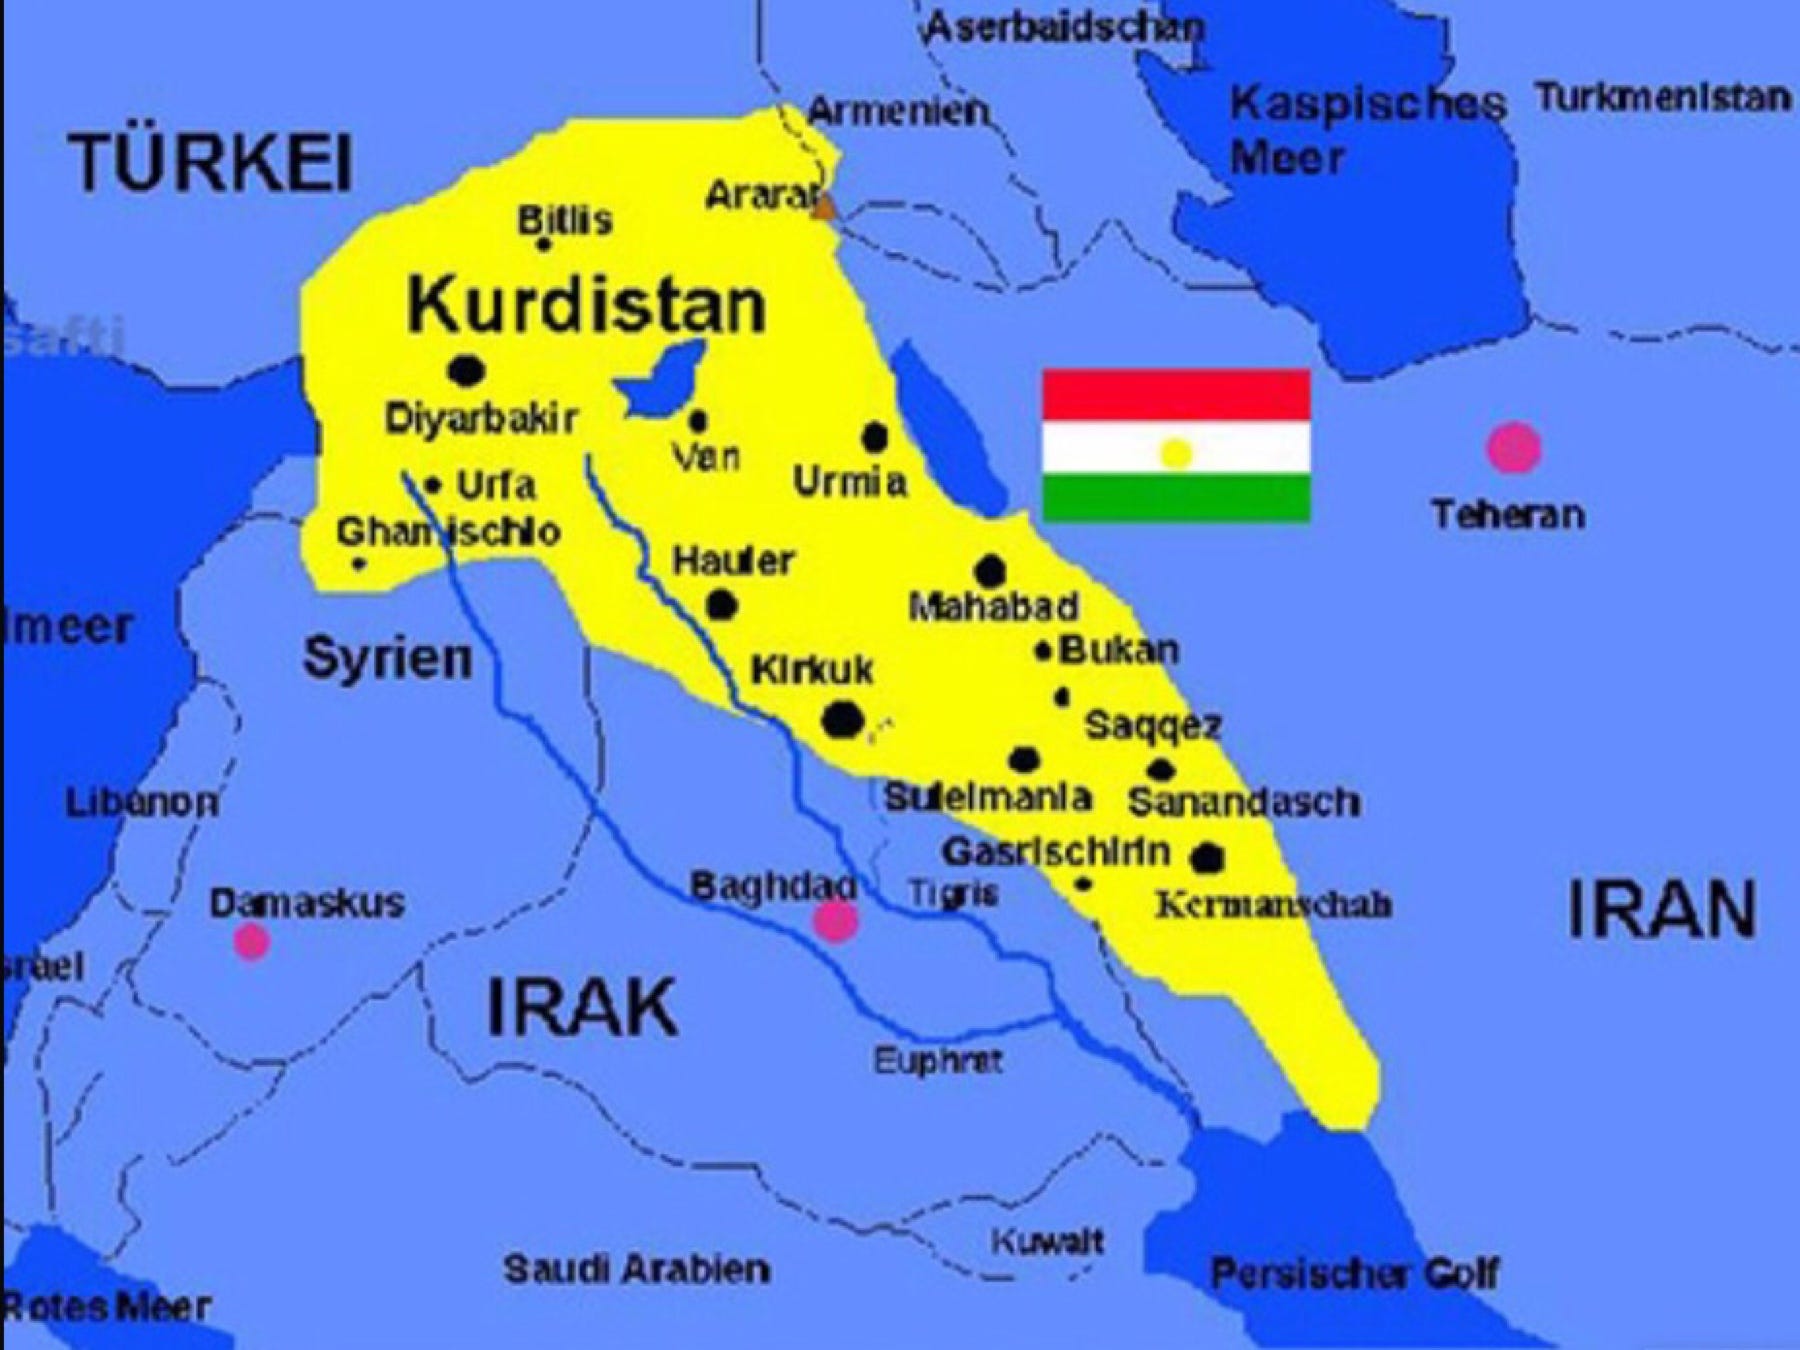 KURDISTAN : WHY IT IS NOT ON THE MAP. | by Mohammad Rasoul Kailani